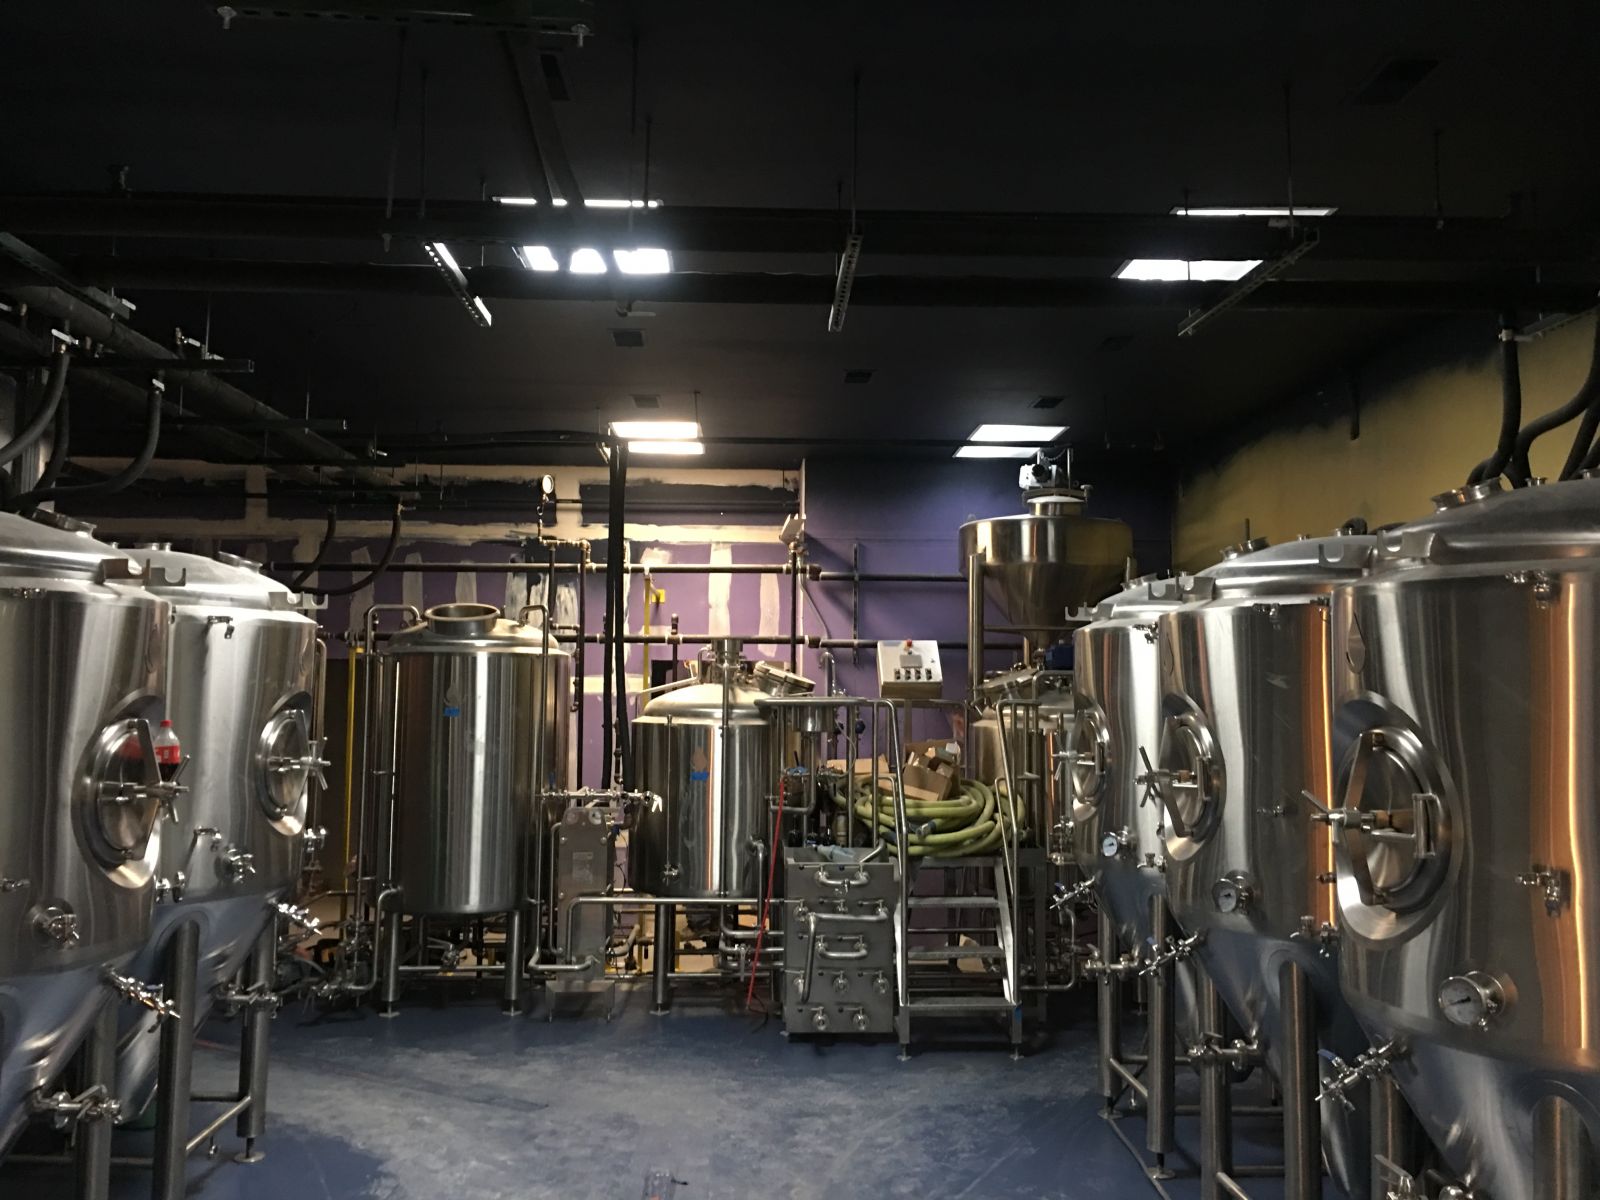 Holy City Brewing is preparing to open two new locations this year, including a collaboration with EVO Pizzeria called Baker & Brewer. (Photo/Ricky Hacker)